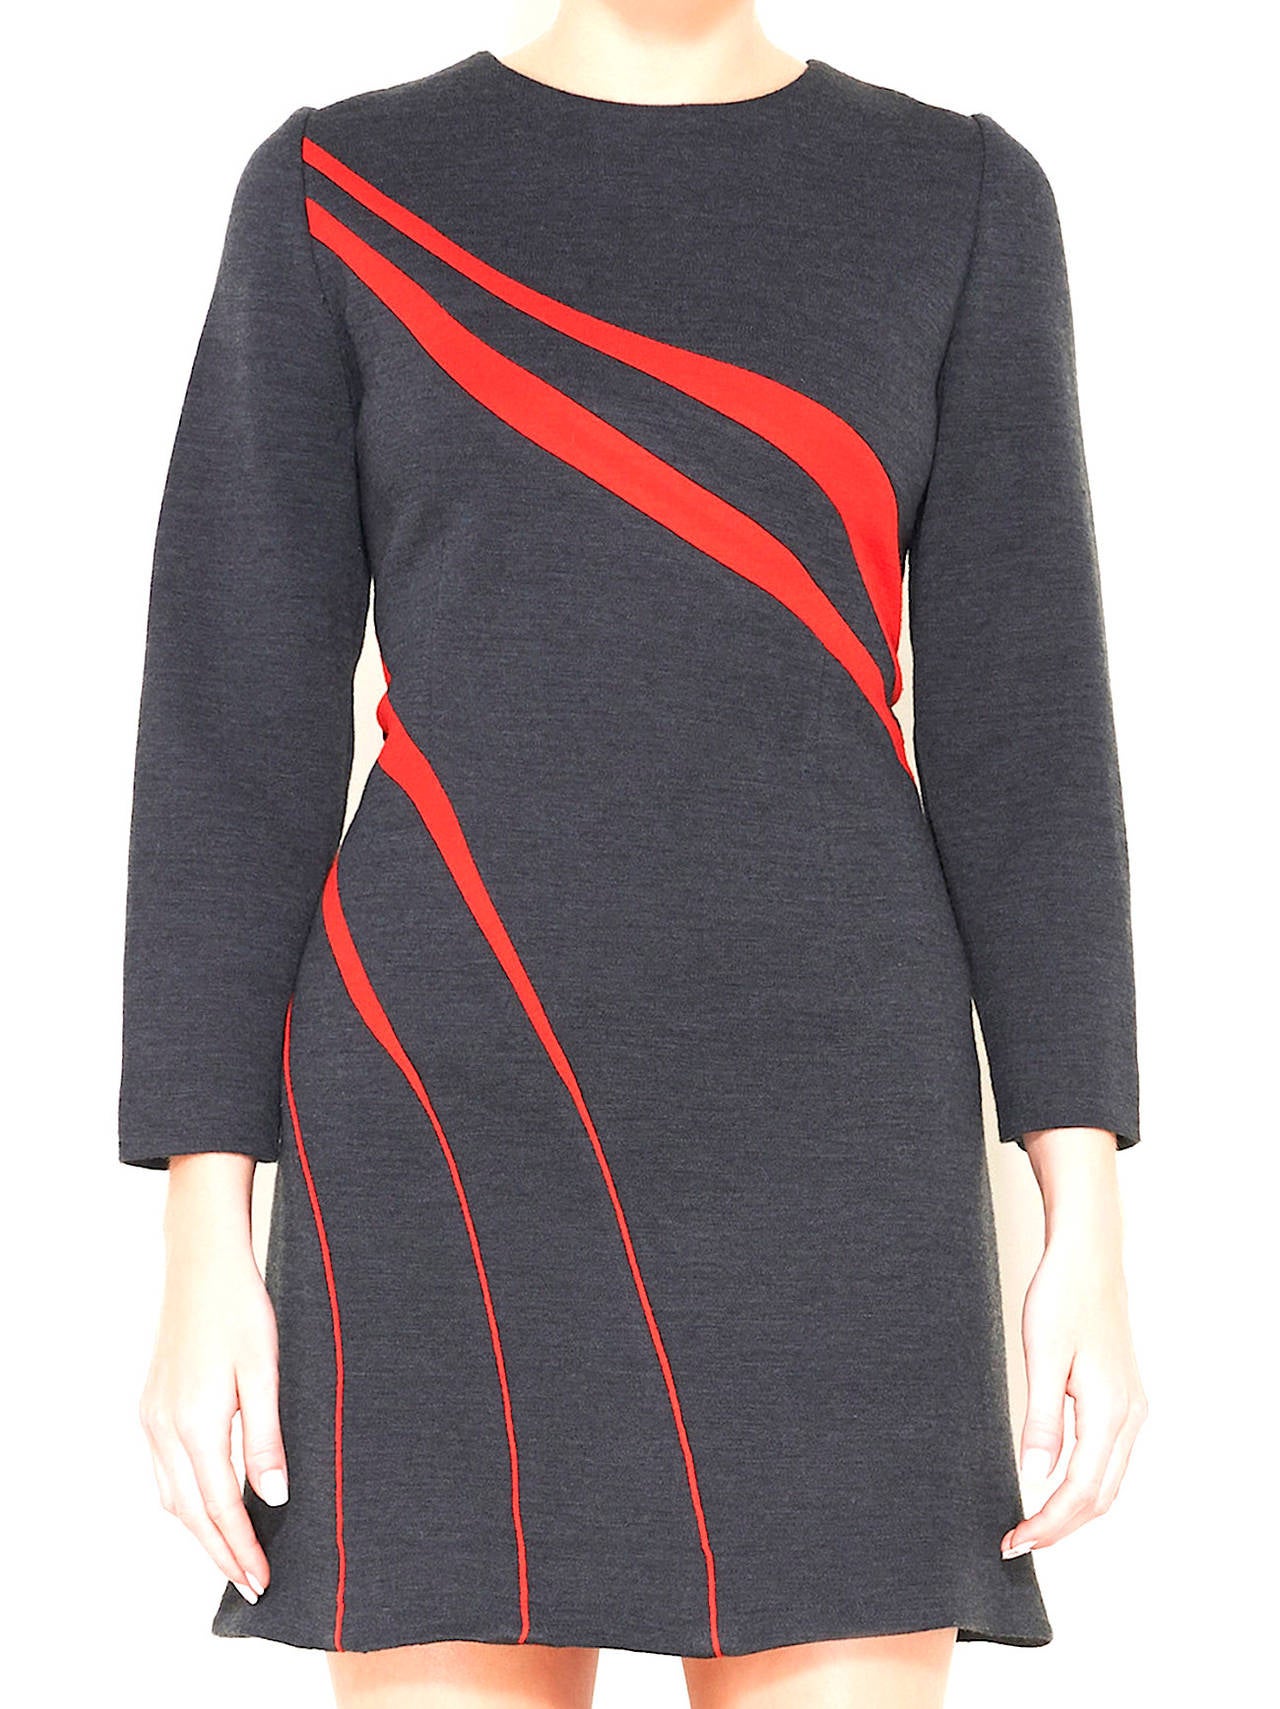 Pierre Cardin Iconic Mod Dress, 1970s In Excellent Condition For Sale In Bethesda, MD